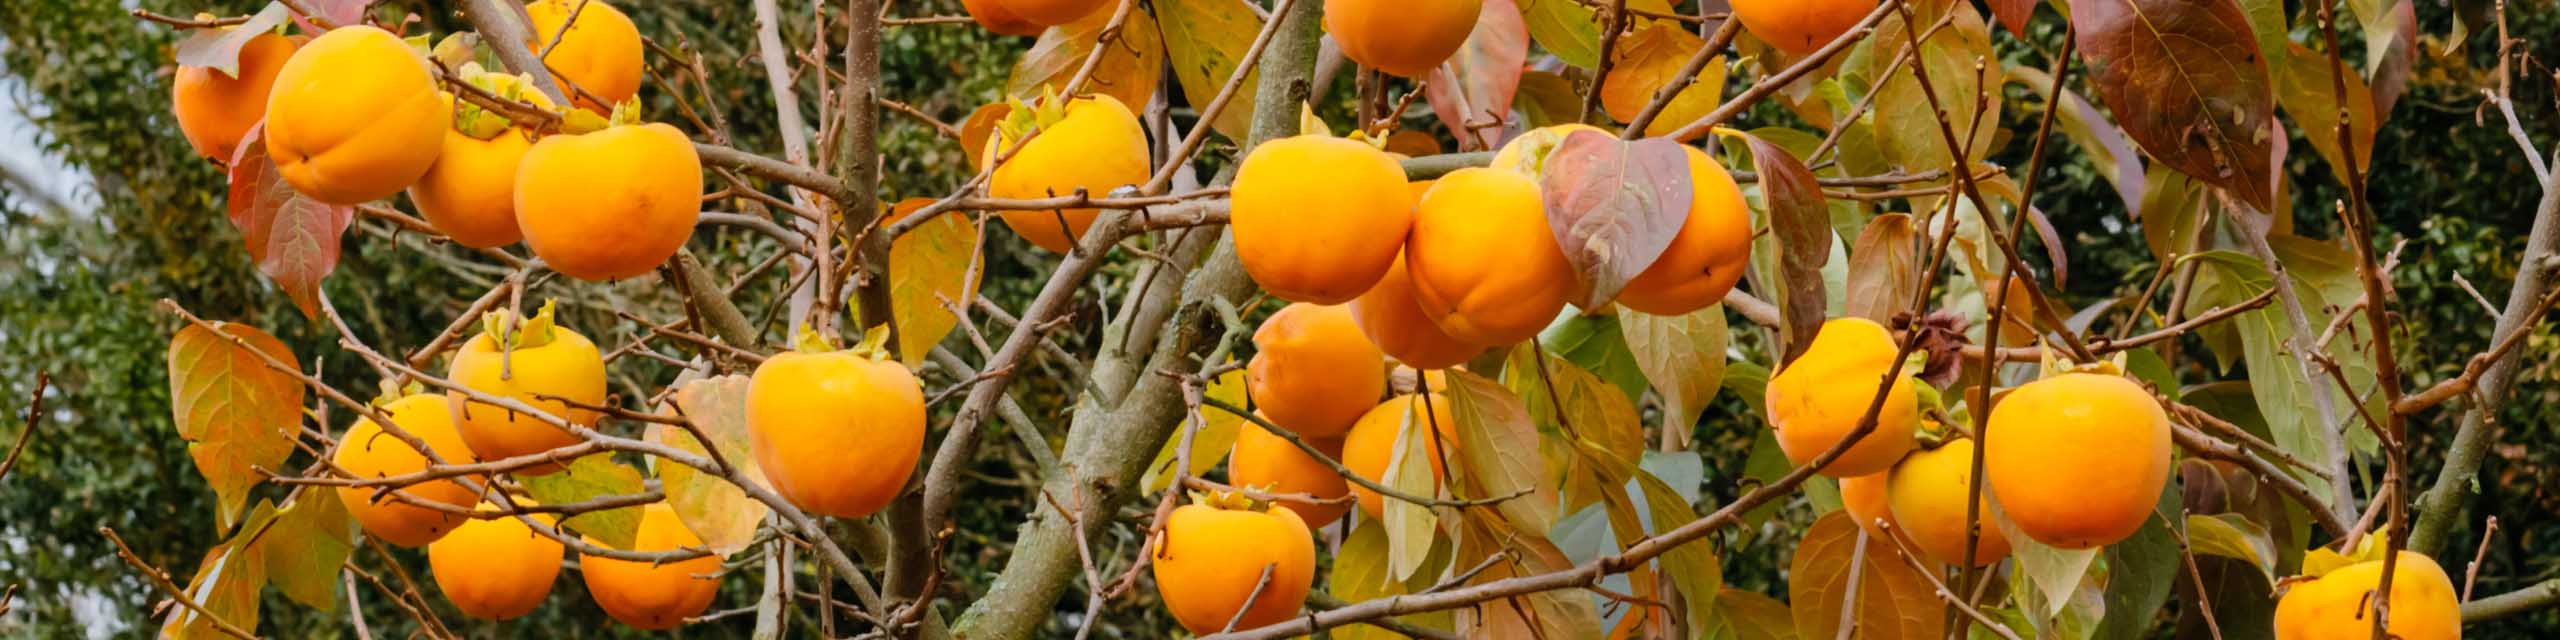 Asian persimmon tree with ripe fruit hanging from branches.